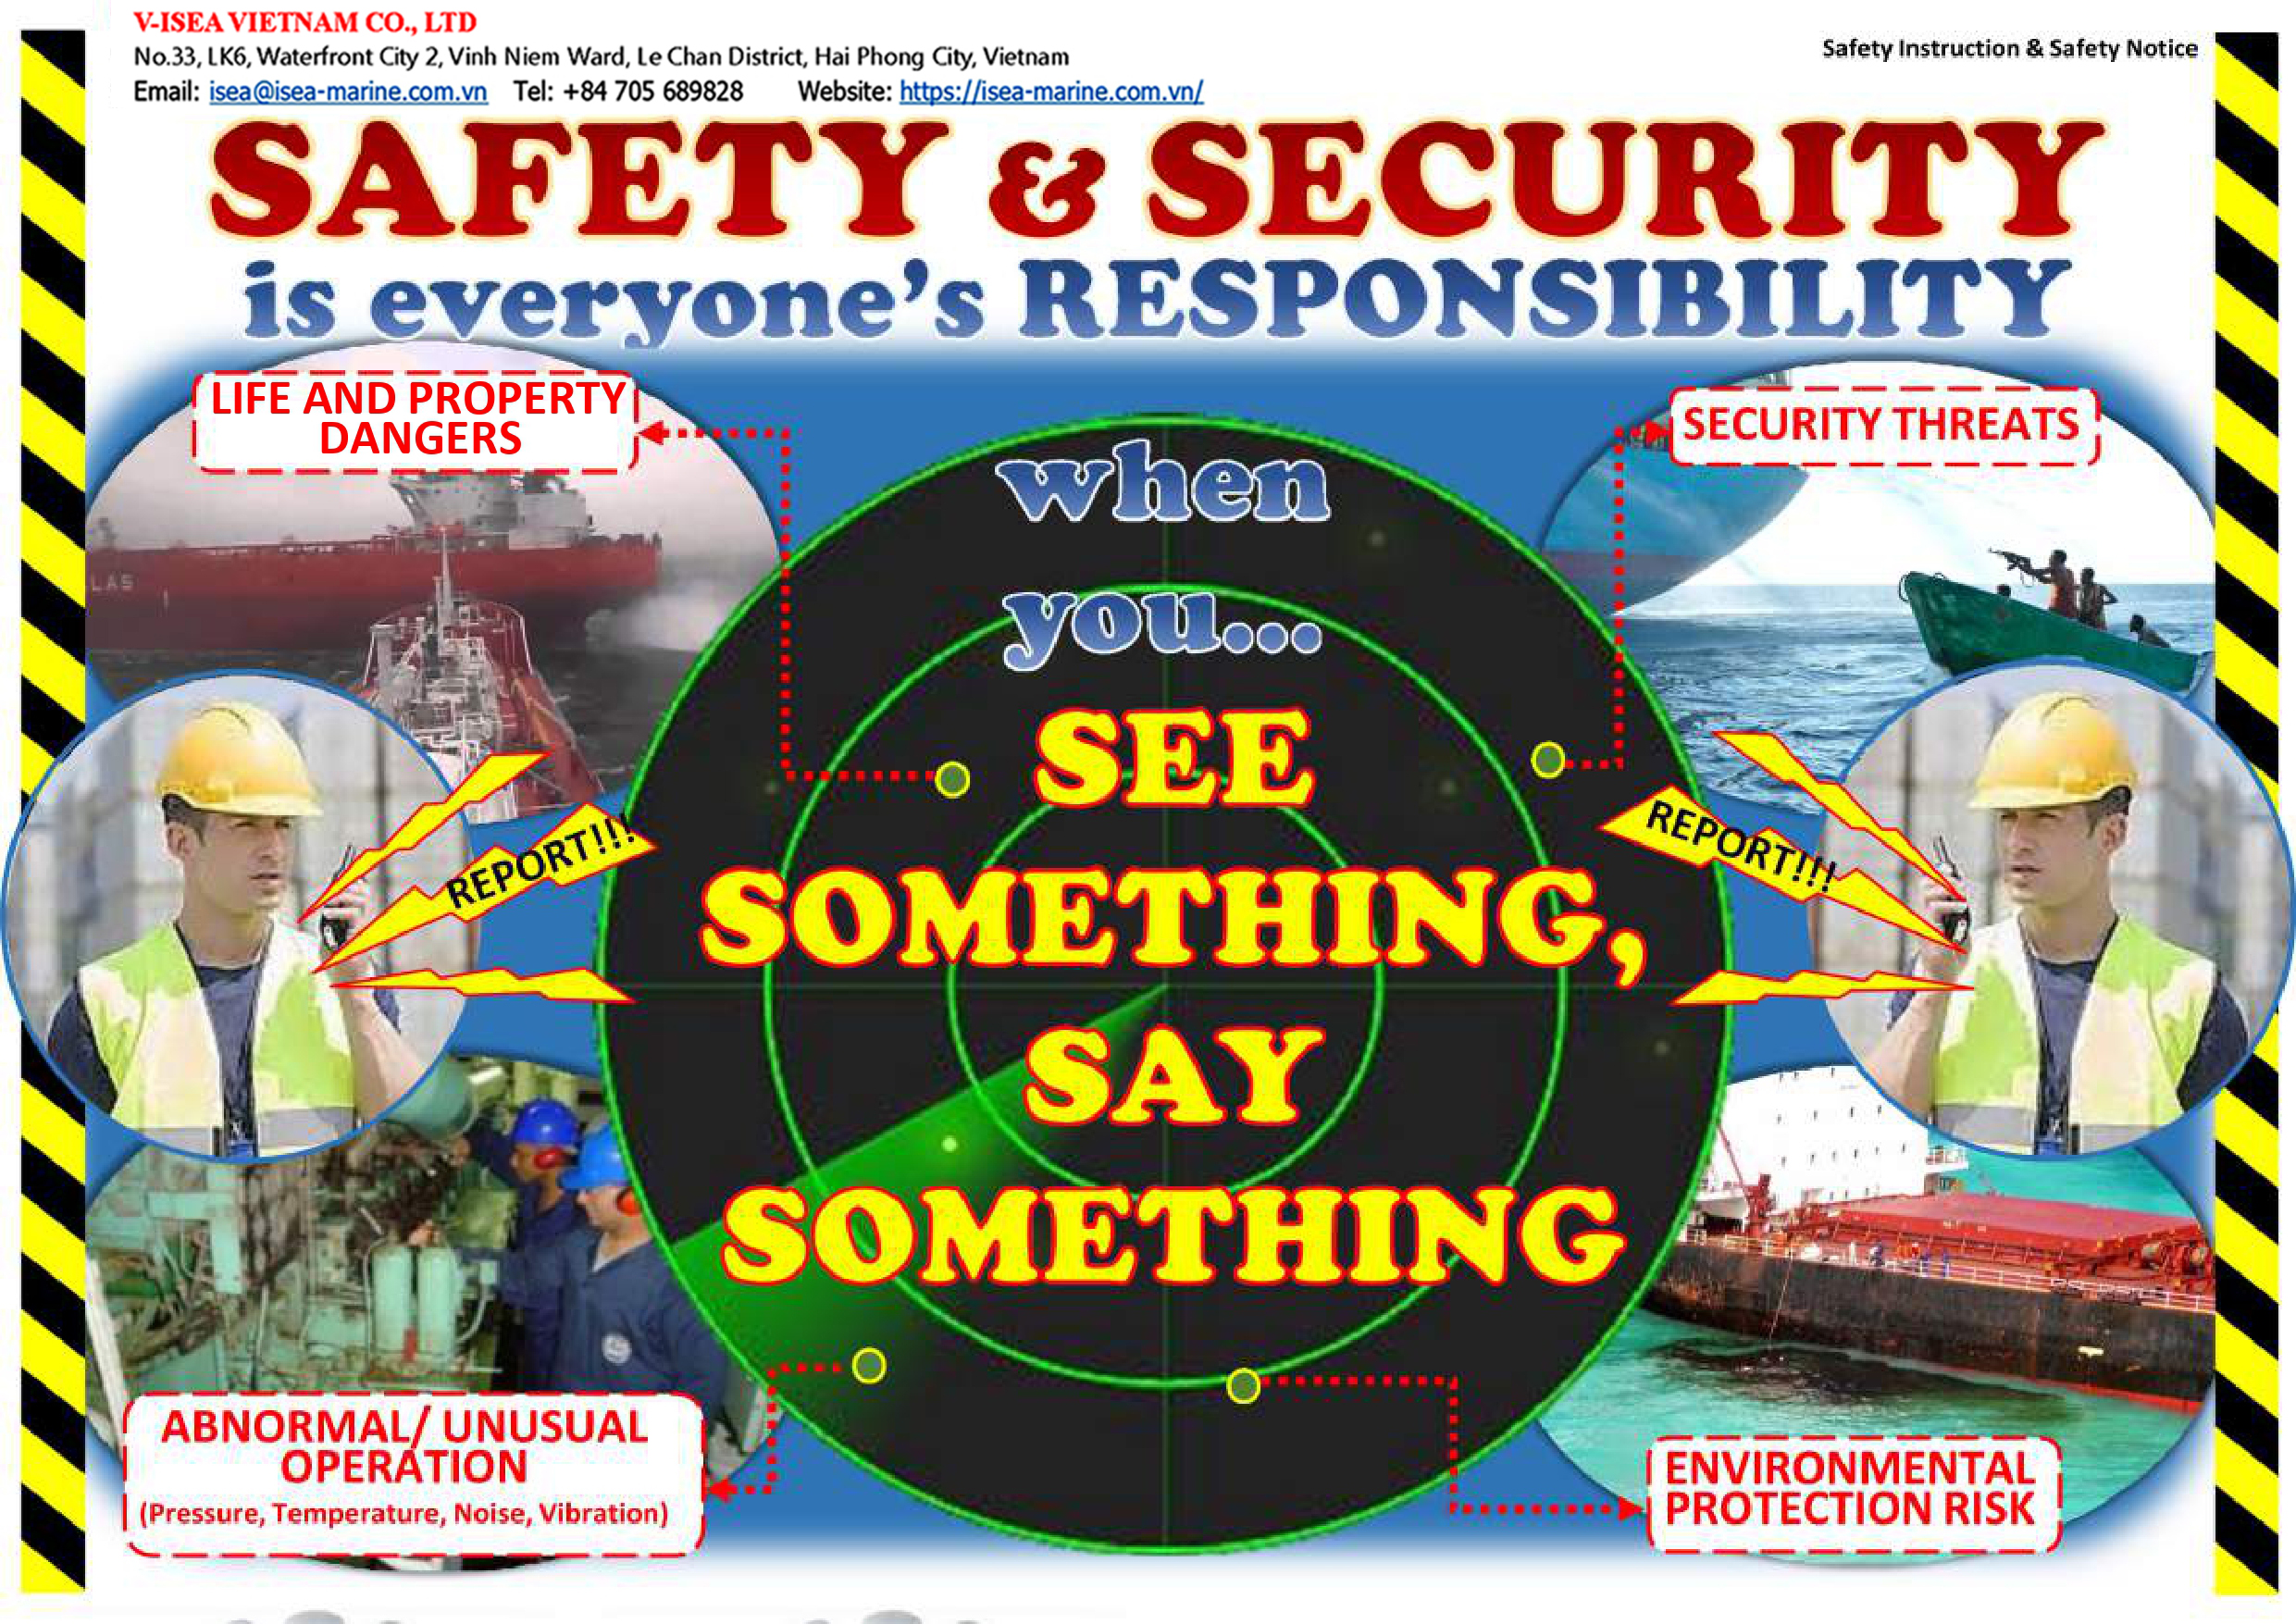 Ship Safety and Security 